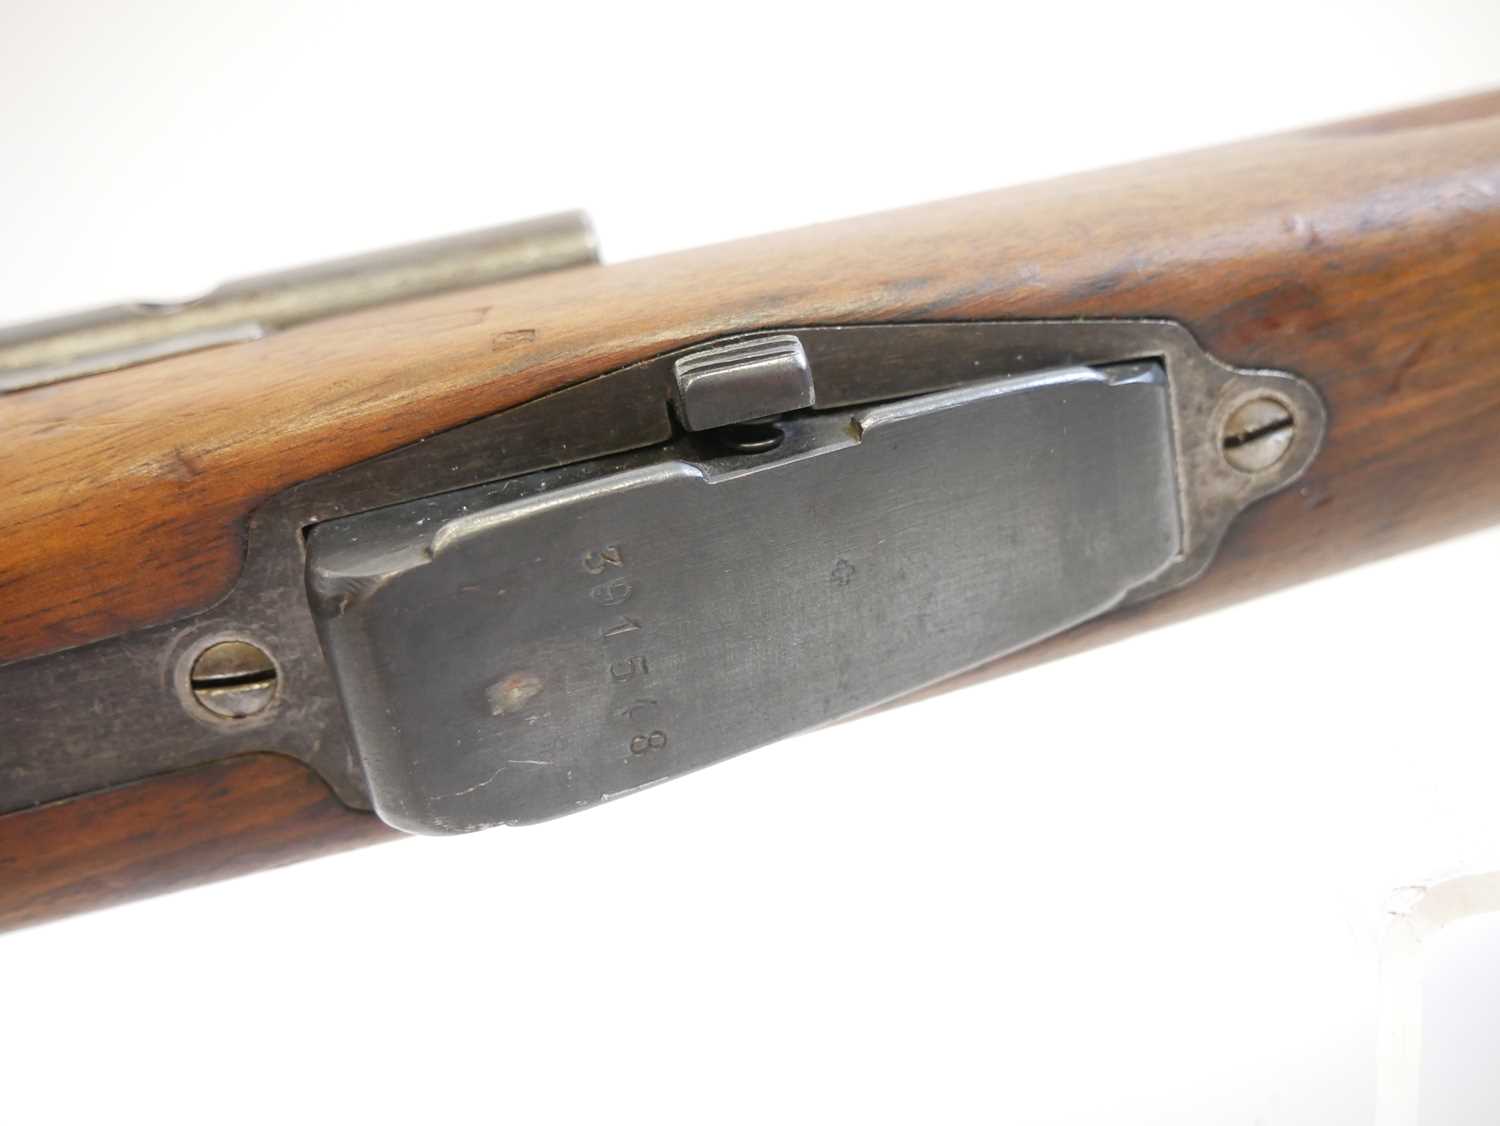 Schmidt Rubin 1911 7.5mm straight pull rifle, LICENCE REQUIRED - Image 9 of 14